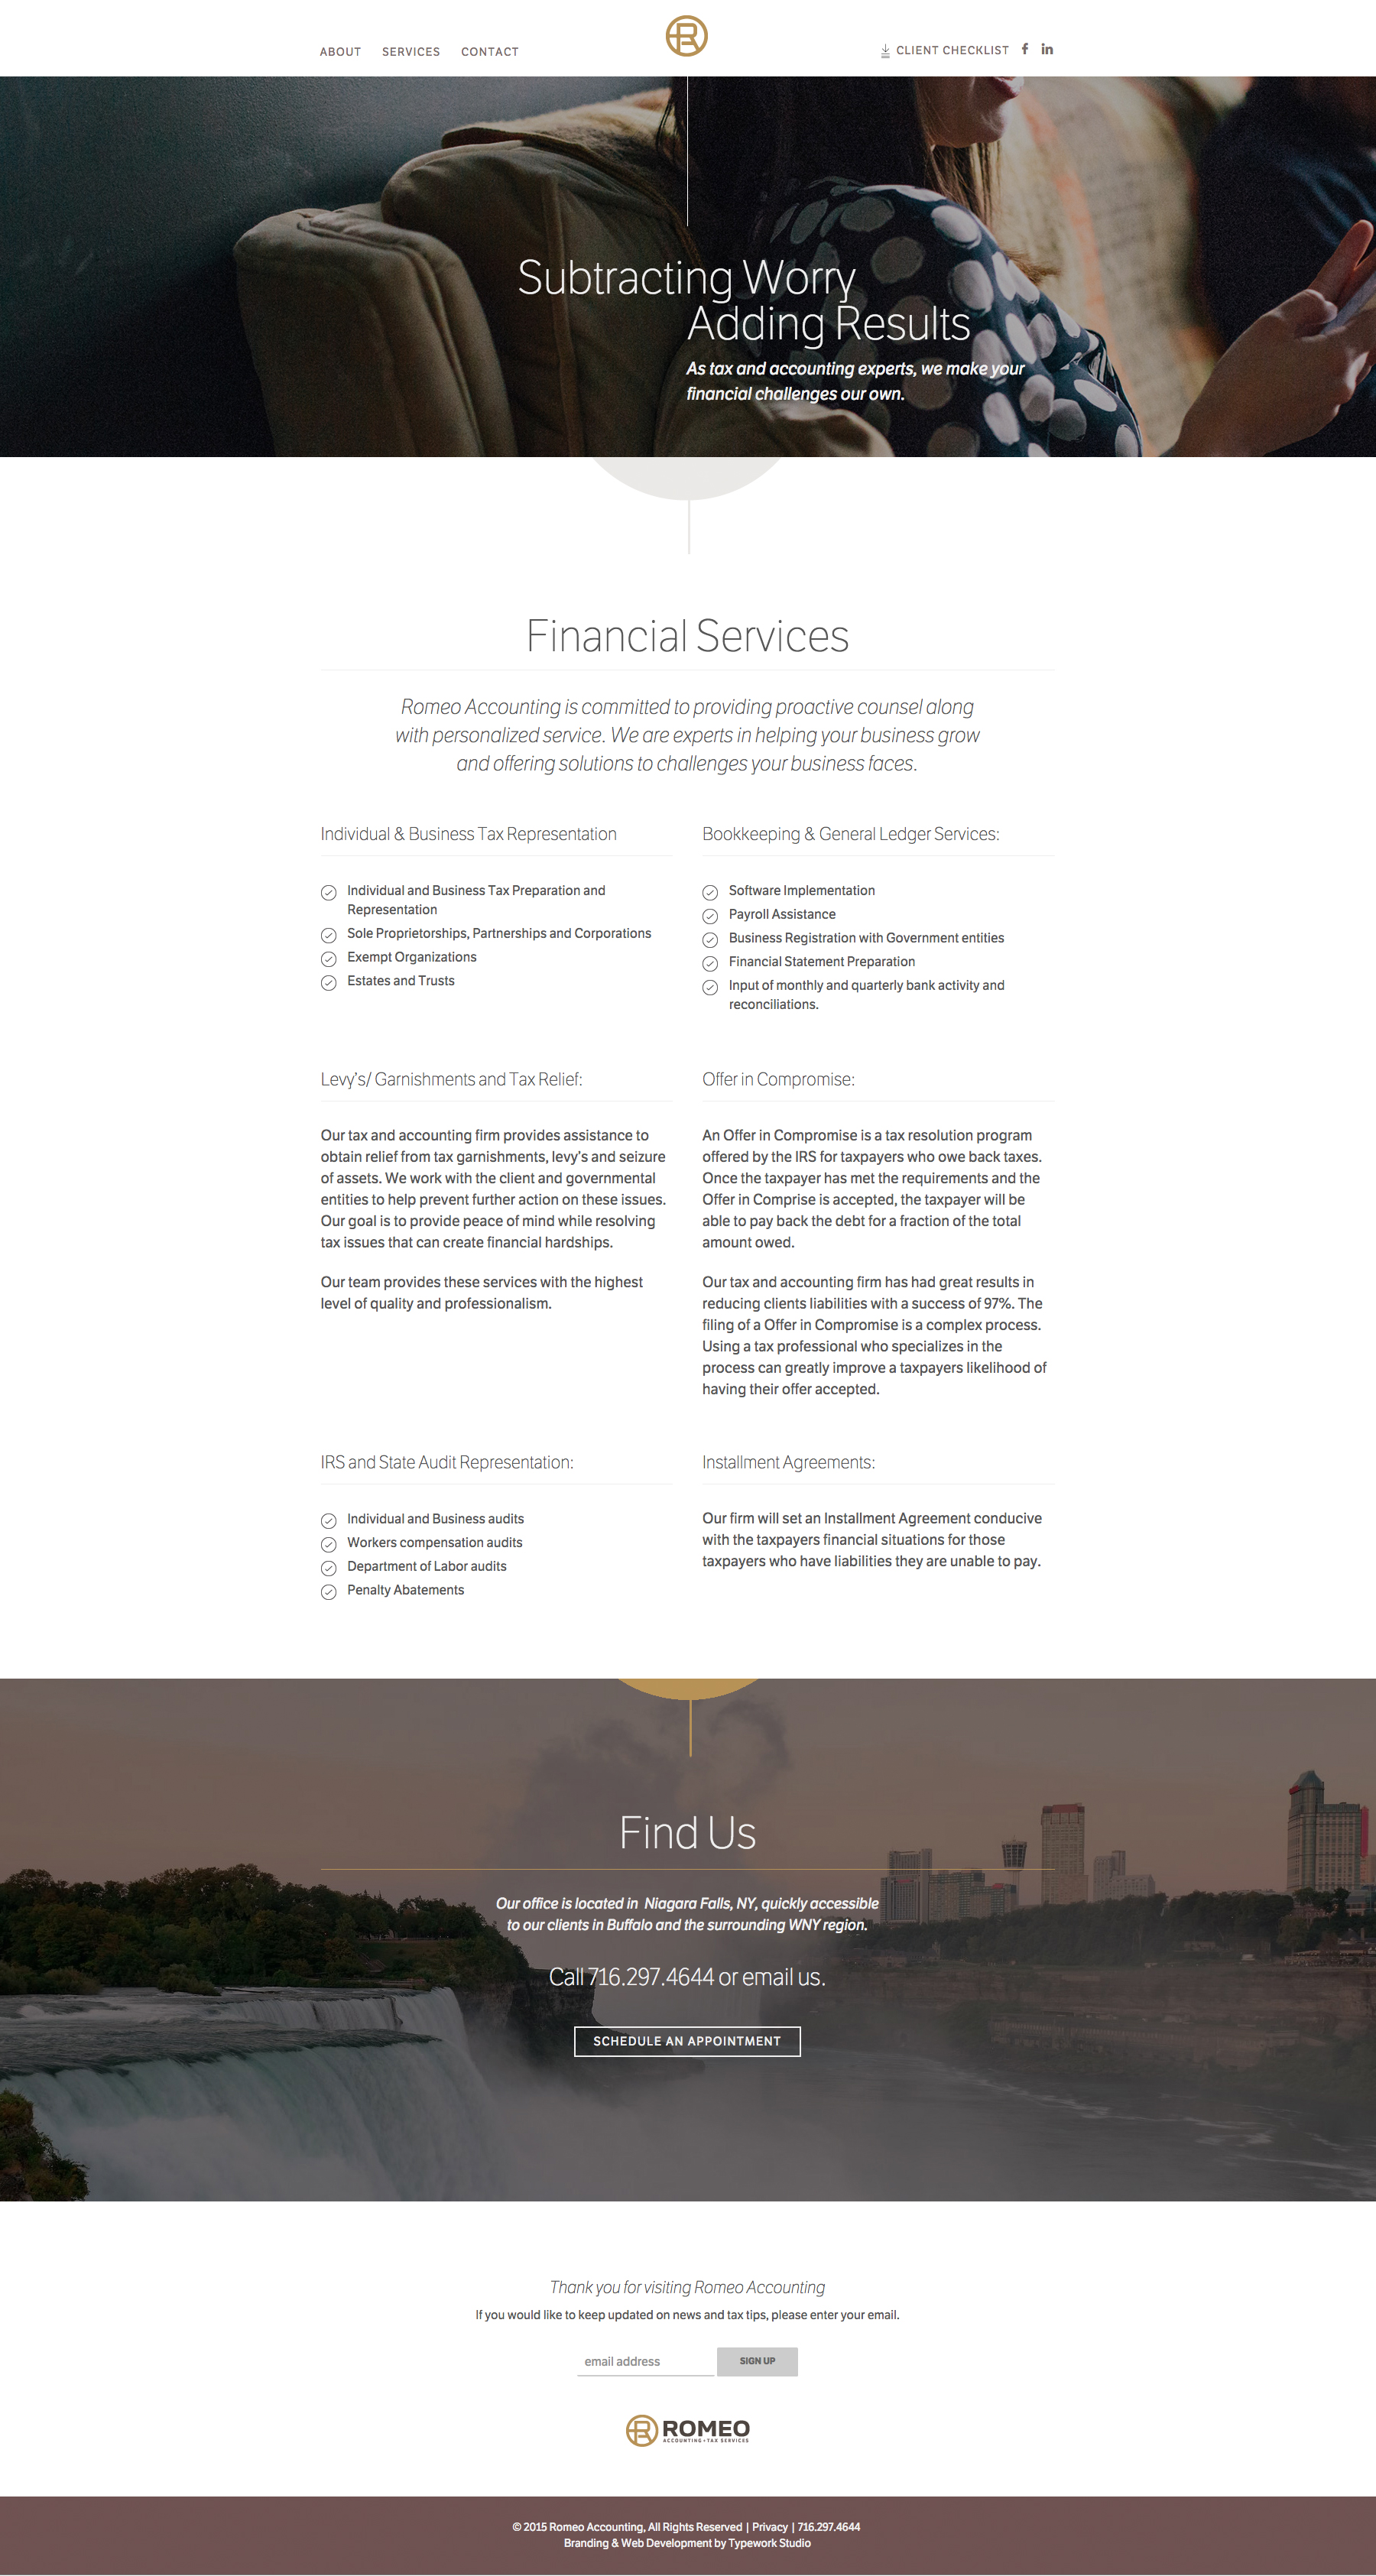 Romeo Accounting Services CMS Web Design by Typework Studio Design Agency